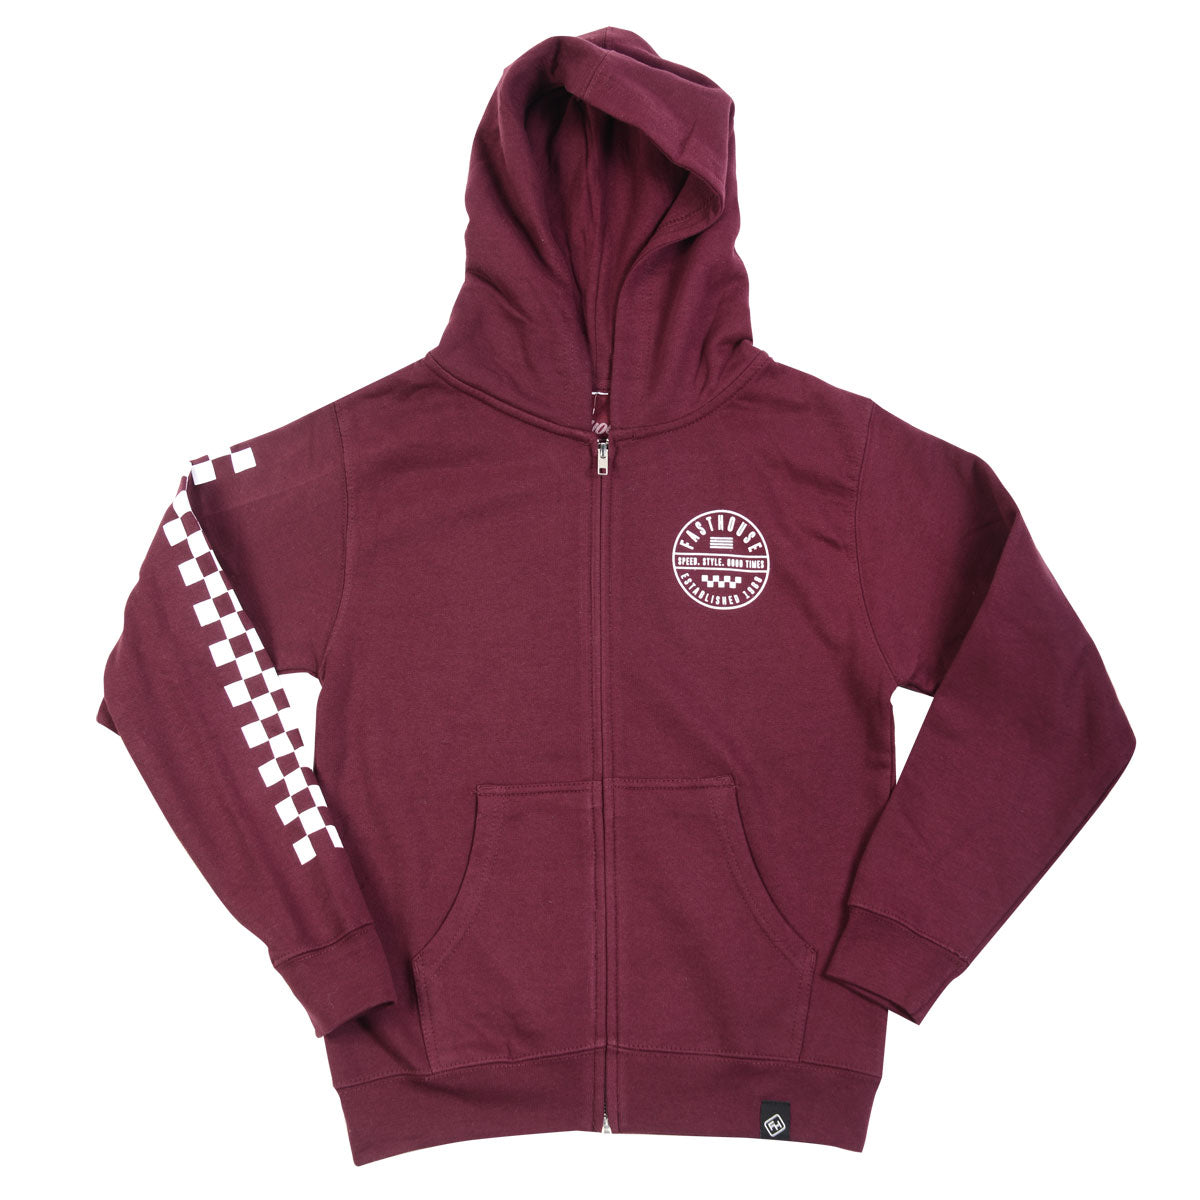 Statement Youth Hooded Zip-Up - Maroon